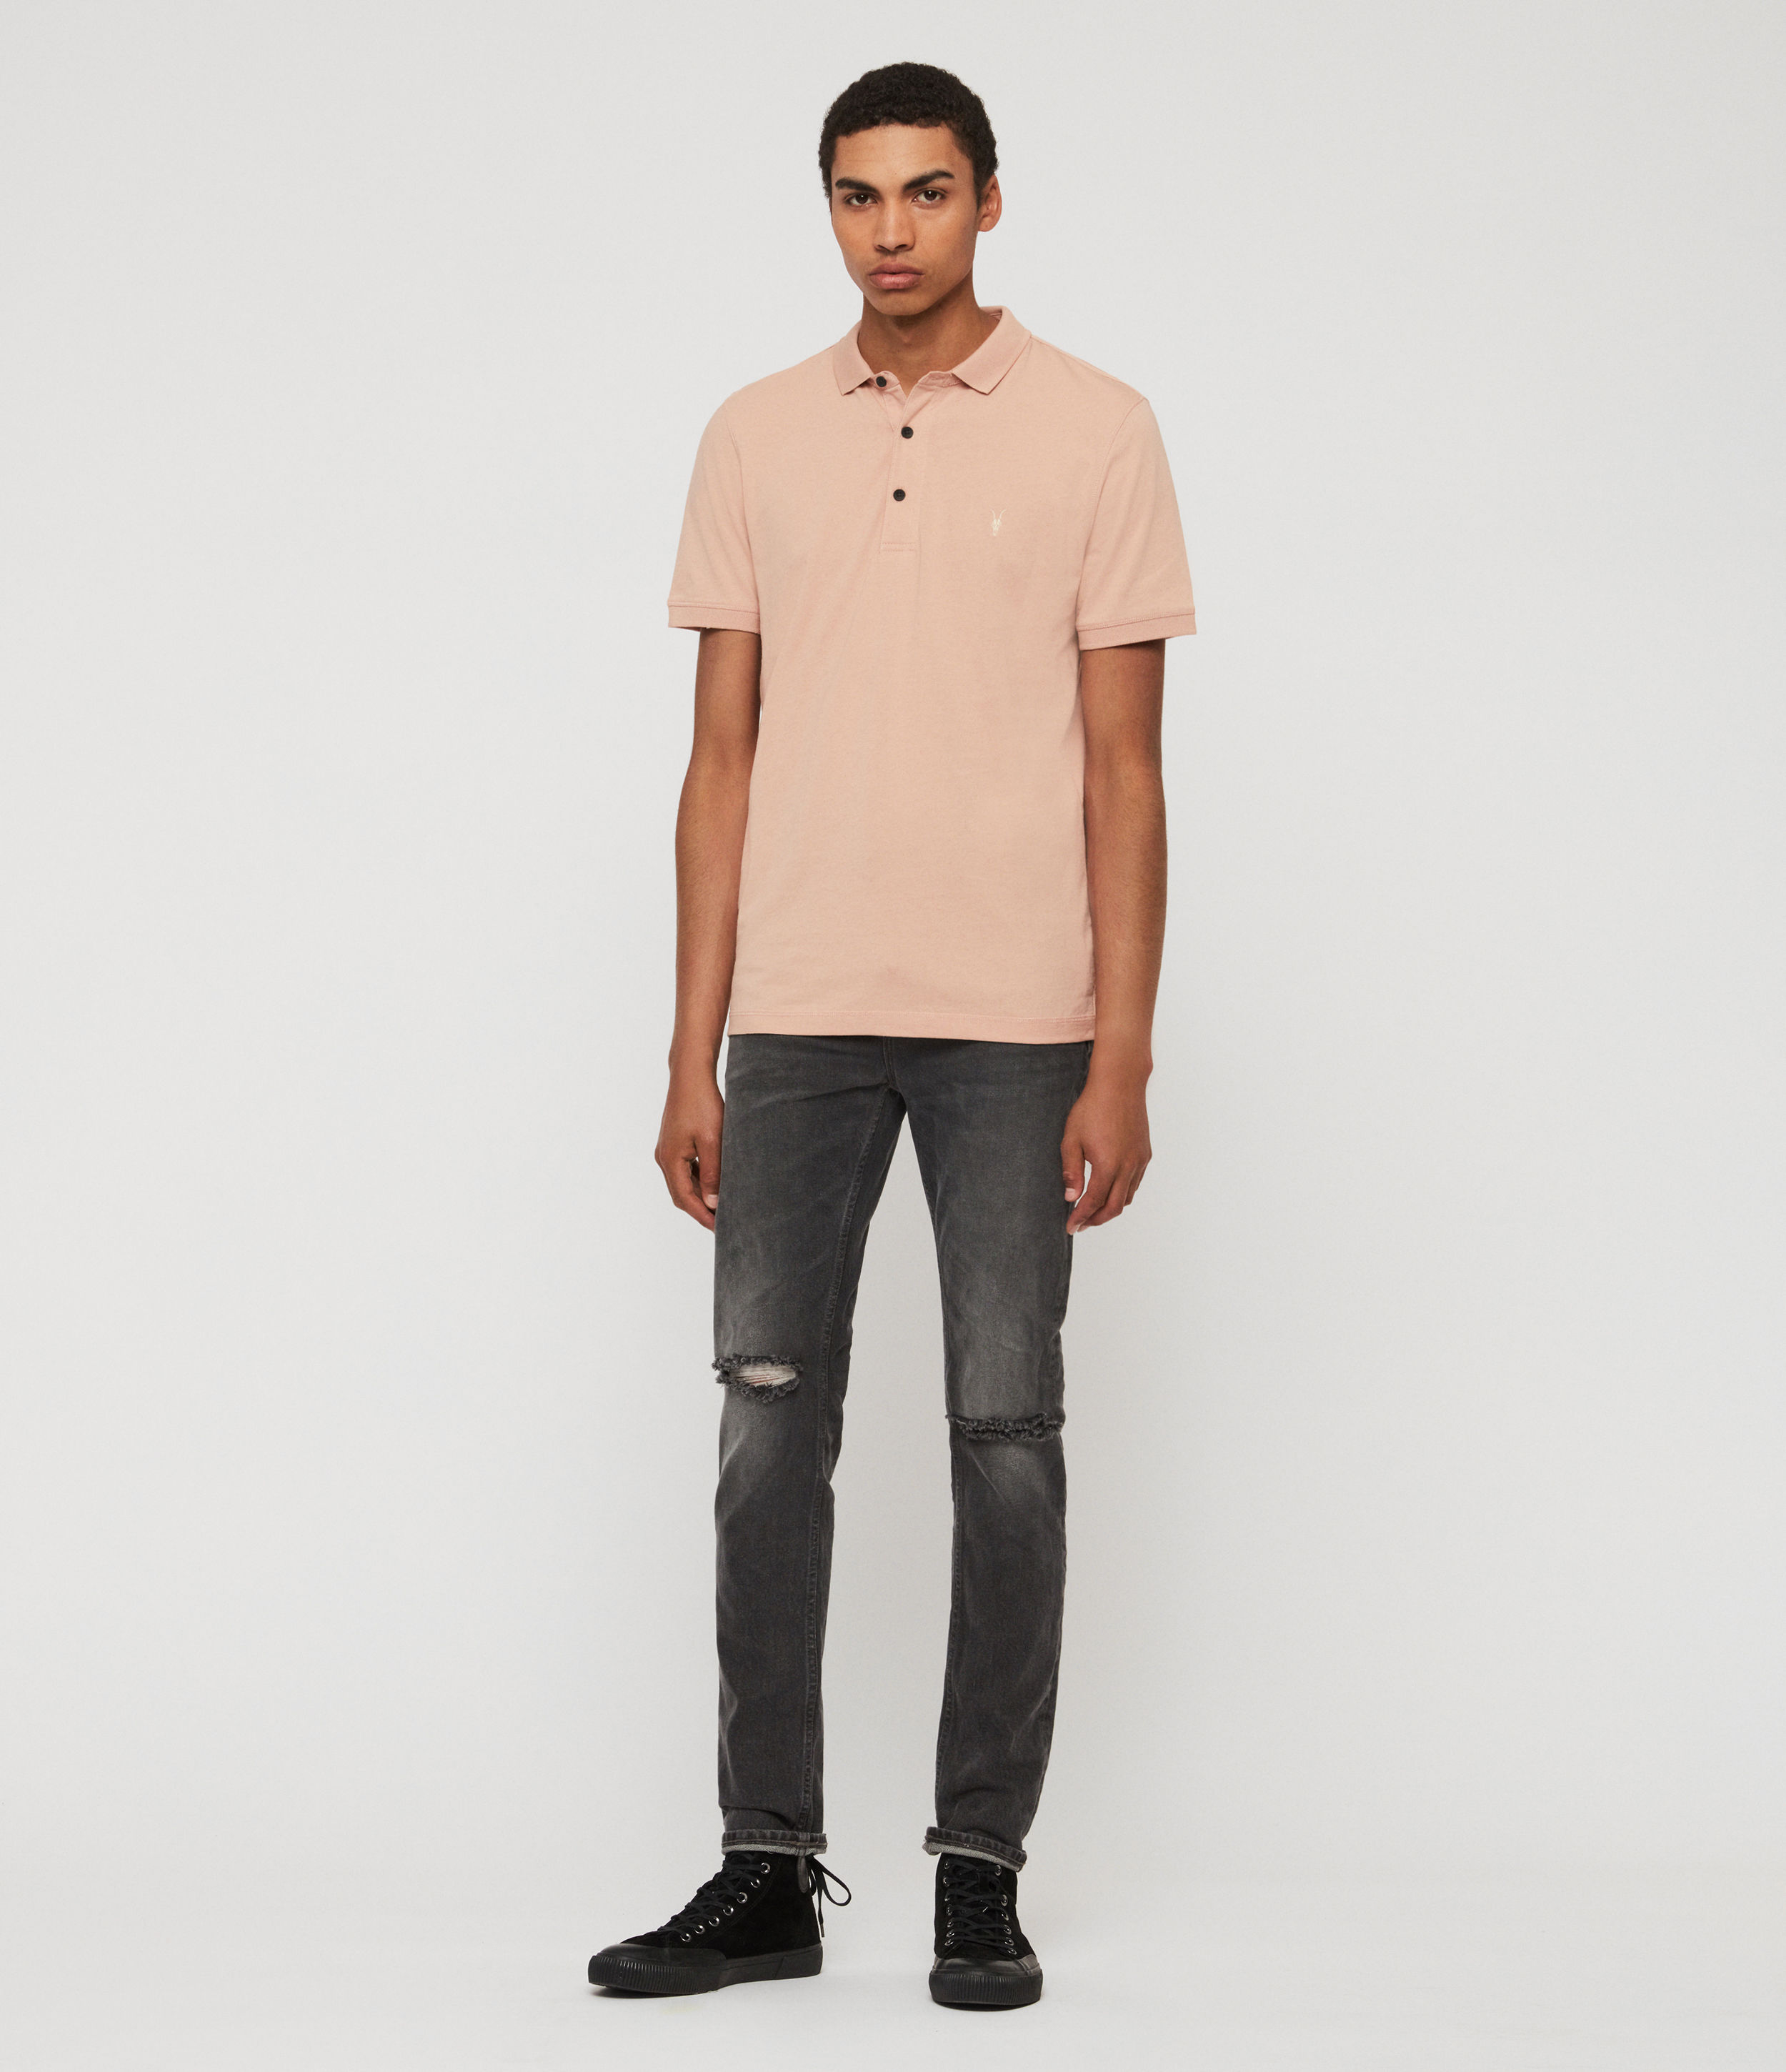 Allsaints Men's Cotton Slim Fit Cooper Short Sleeve Polo Shirt In Blossom Pink